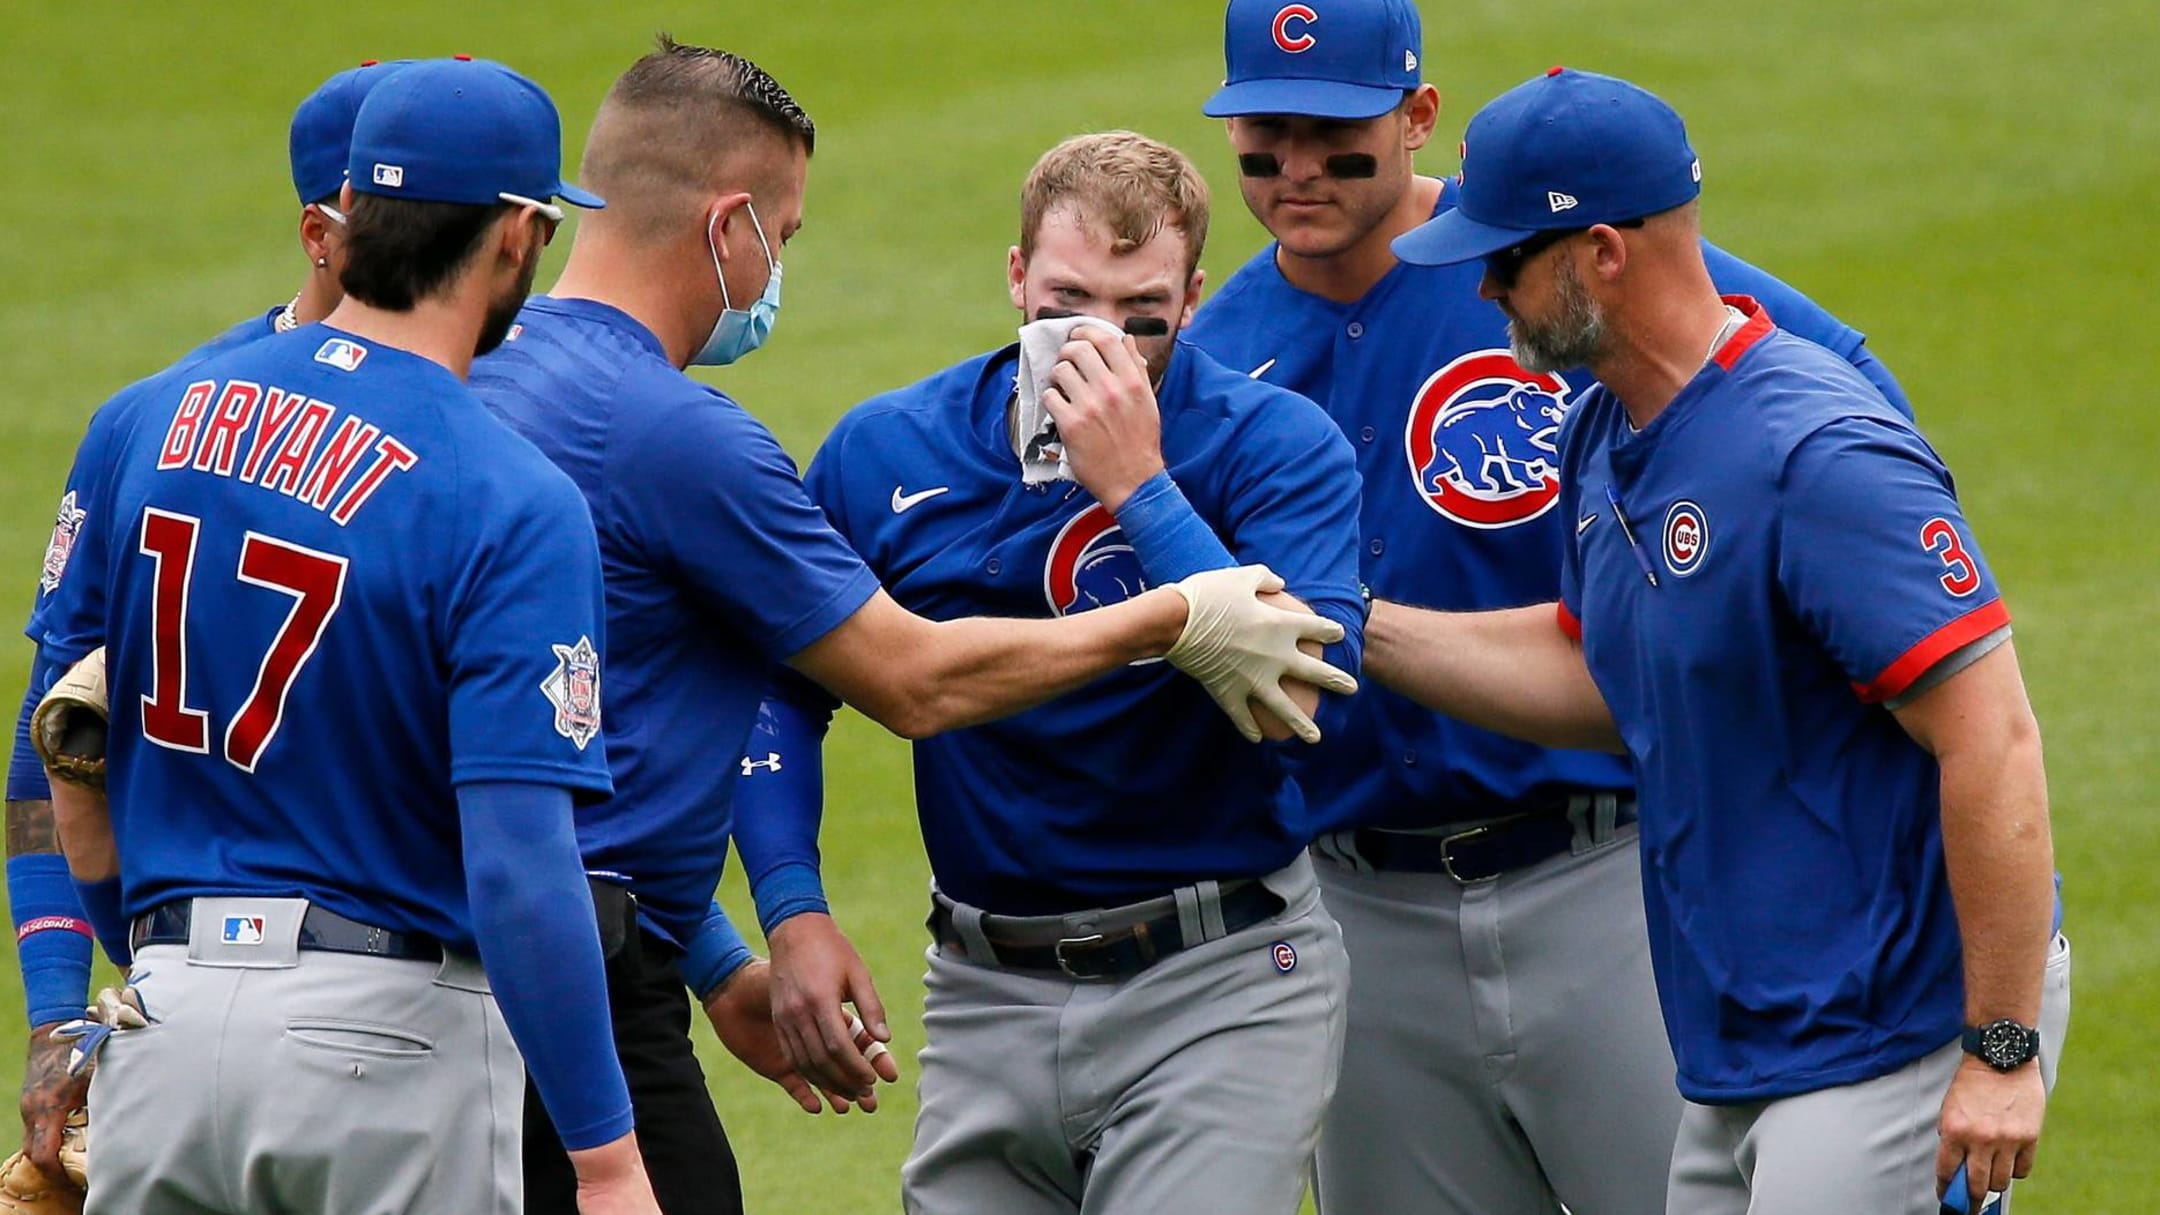 Ian Happ carted off field after scary outfield collision